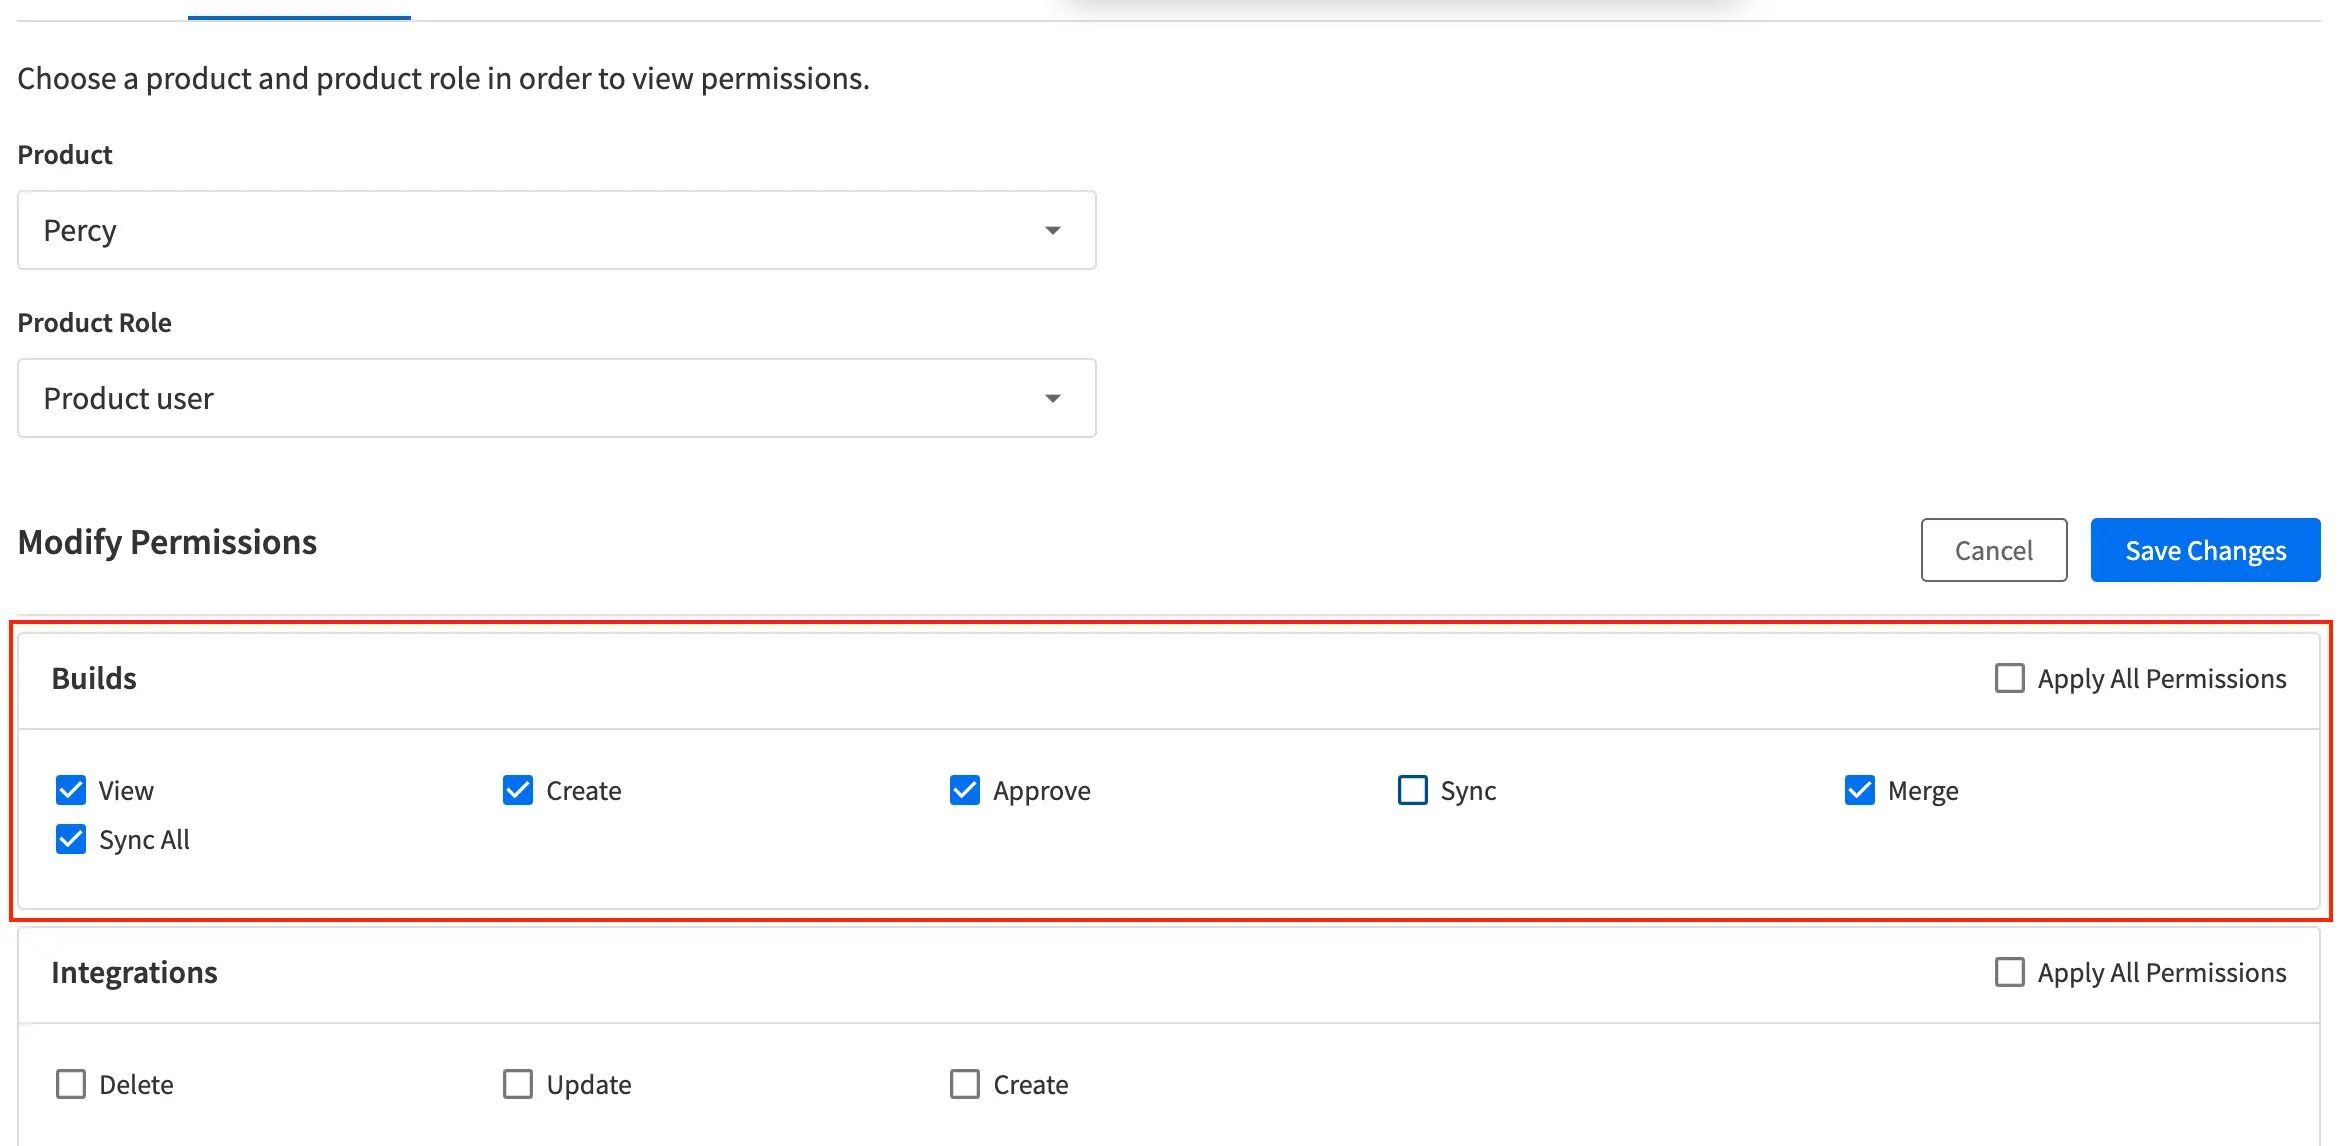 Check or Uncheck the radio buttons next to the permissions you want to change